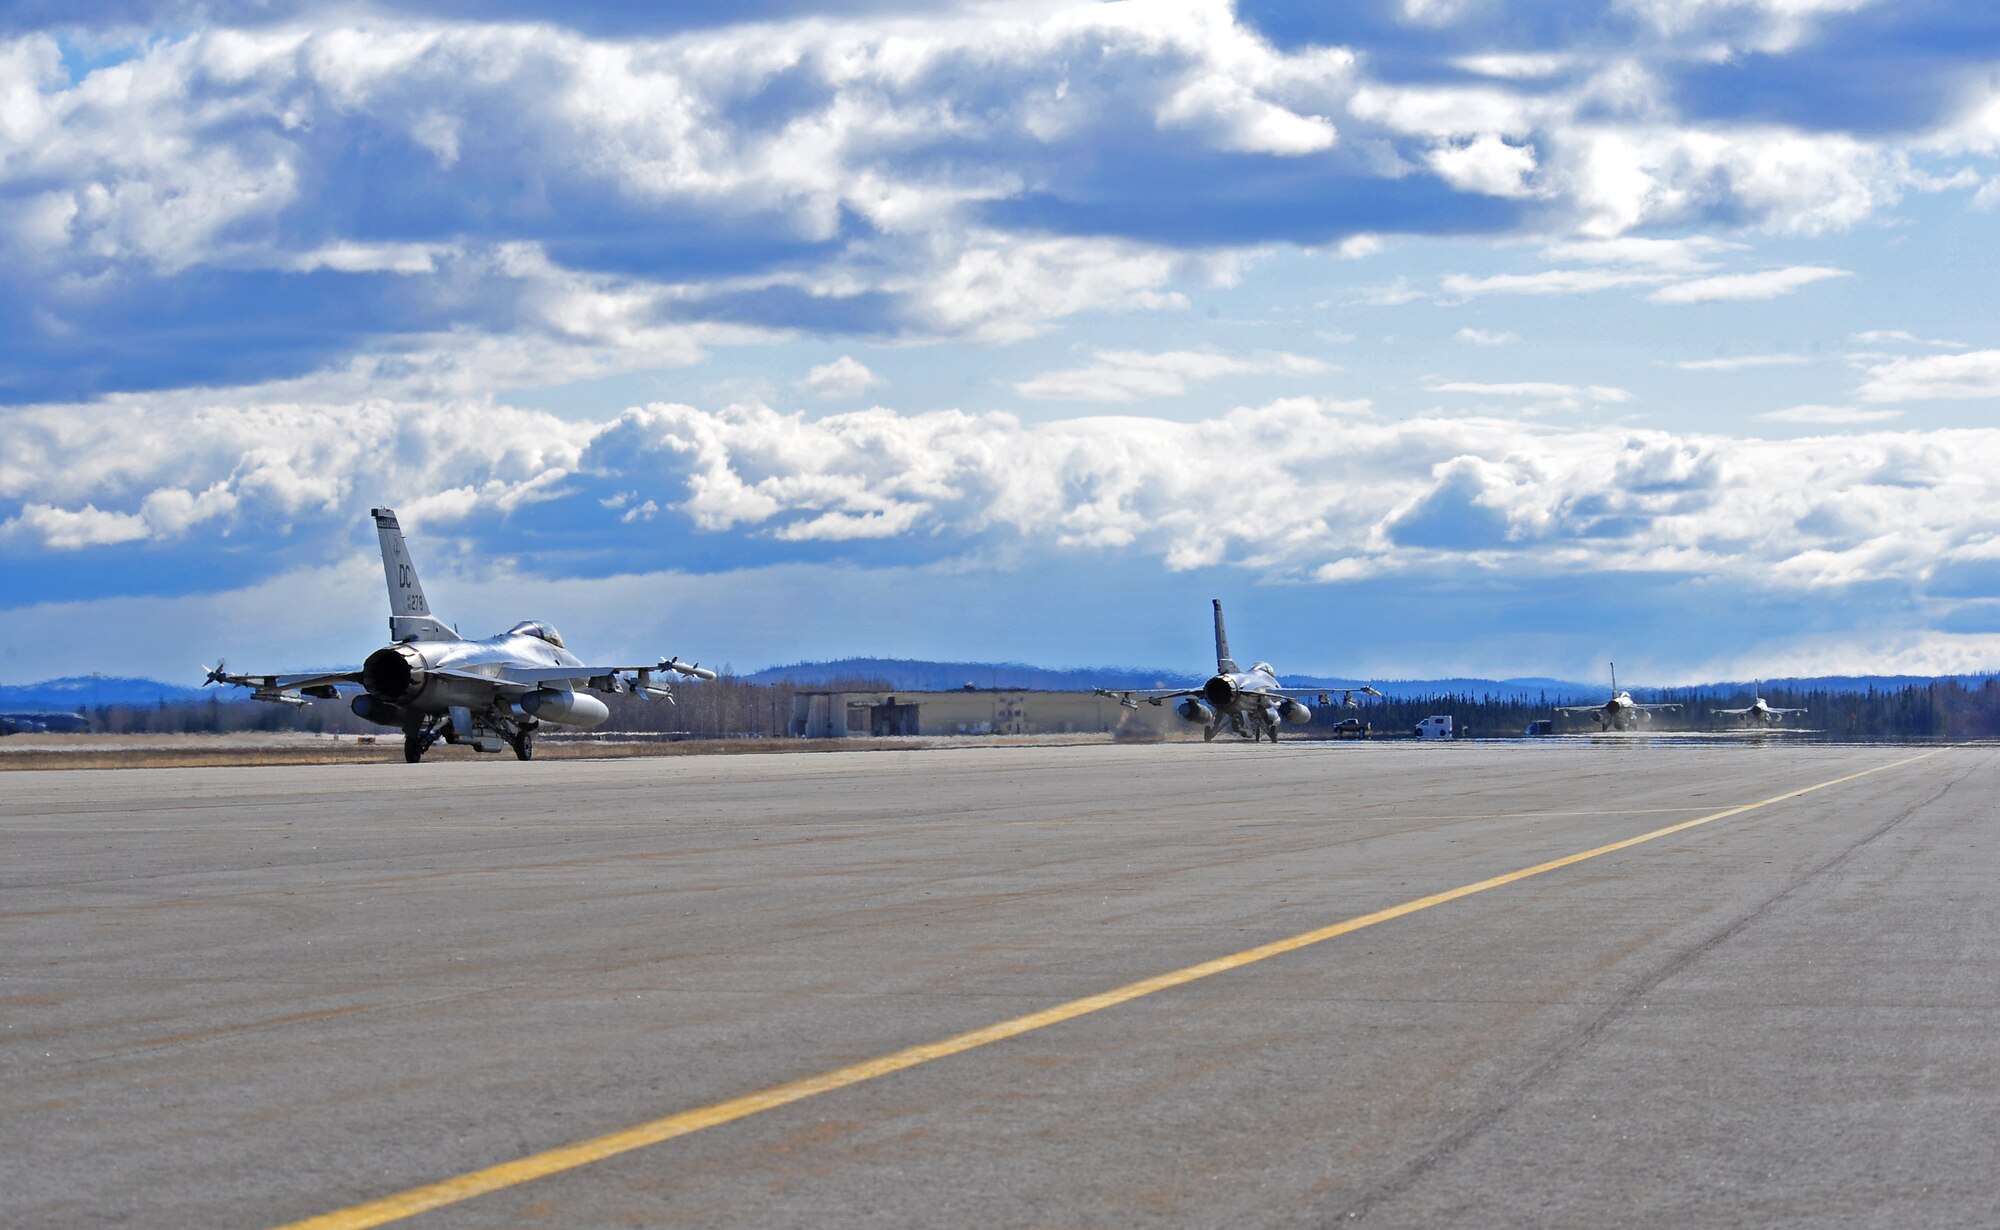 F-16 Fighting Falcon aircraft assigned to the 121st Fighter Squadron, Joint Base Andrews, Md., taxi down the flightline April 28, 2015, prior to take off during Distant Frontier at Eielson Air Force Base, Alaska.  Distant Frontier is a preparation period during which RED FLAG-Alaska participants familiarize themselves with the airspace. (U.S. Air Force photo by Tech. Sgt. Miguel Lara III/Released)